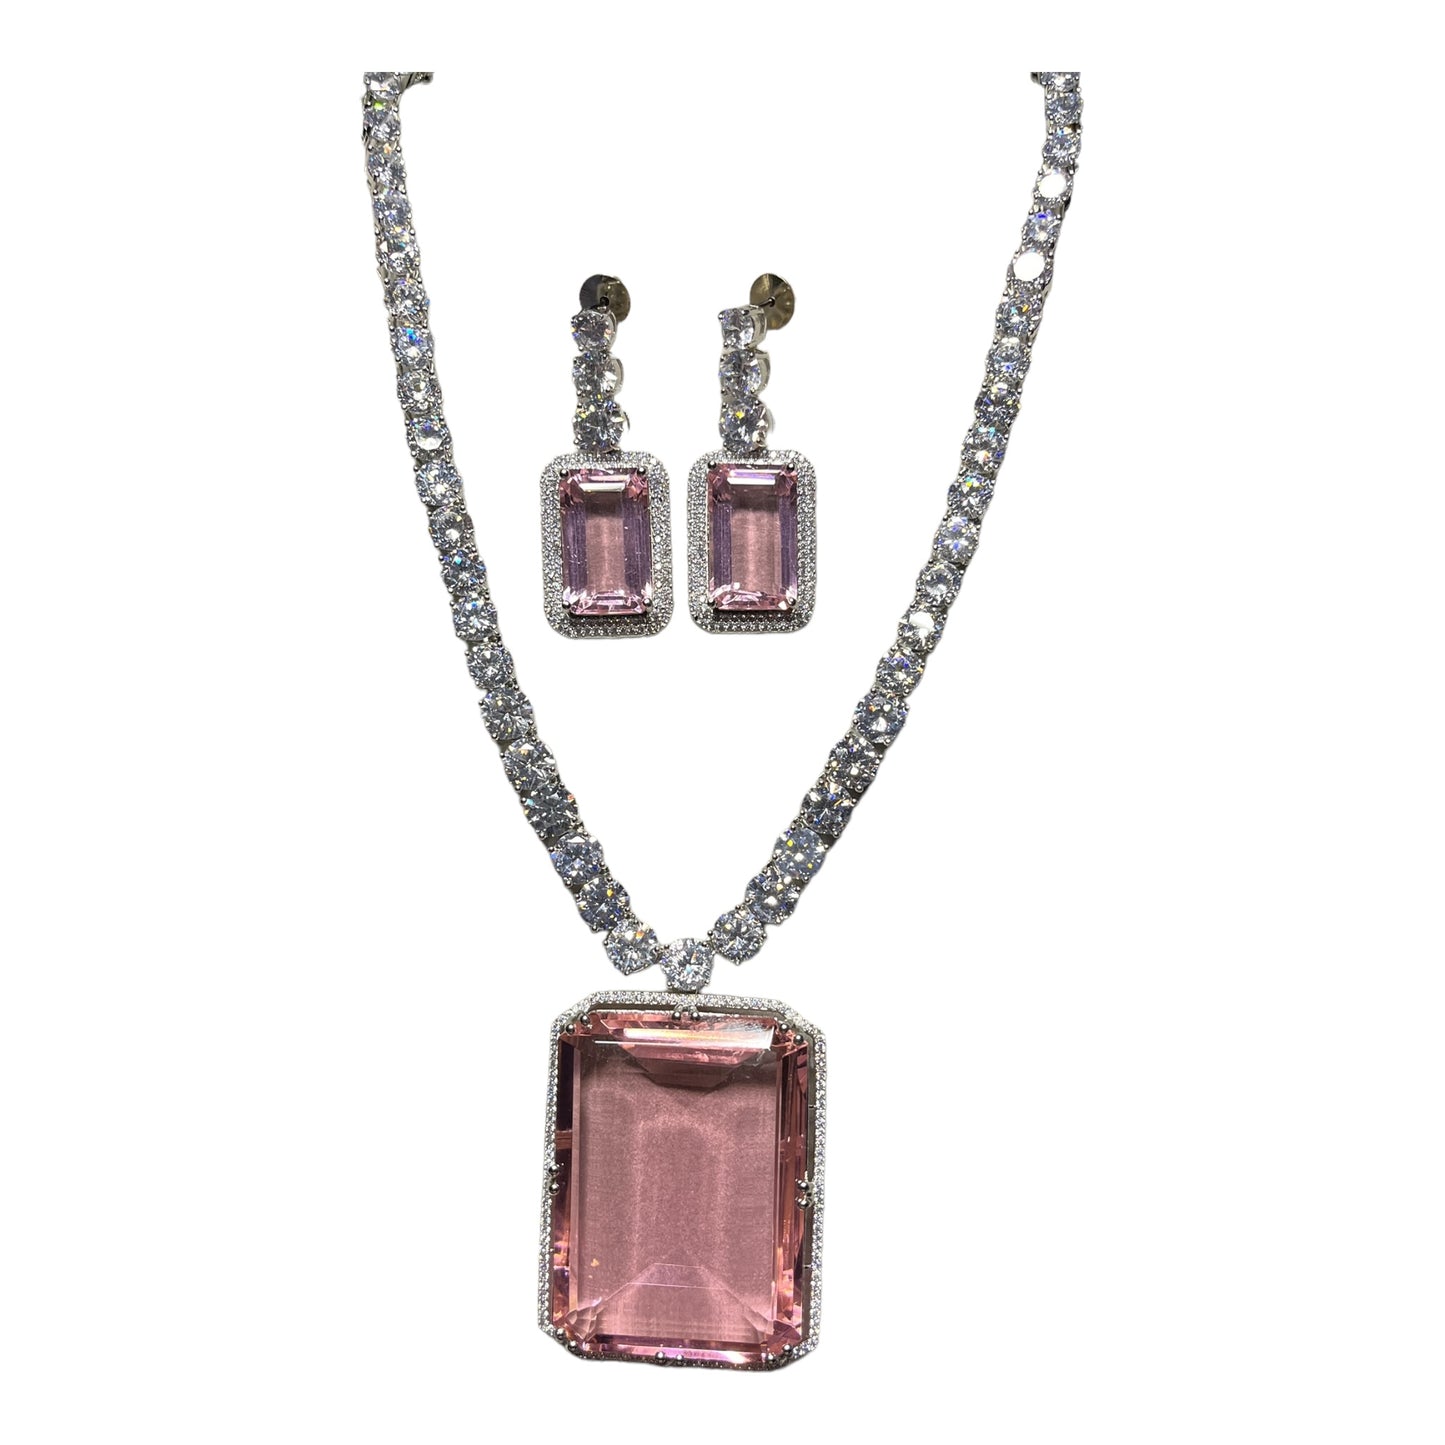 SS Classy Pink Radiance: Sophisticated Gem Pendant Necklace with Earrings.